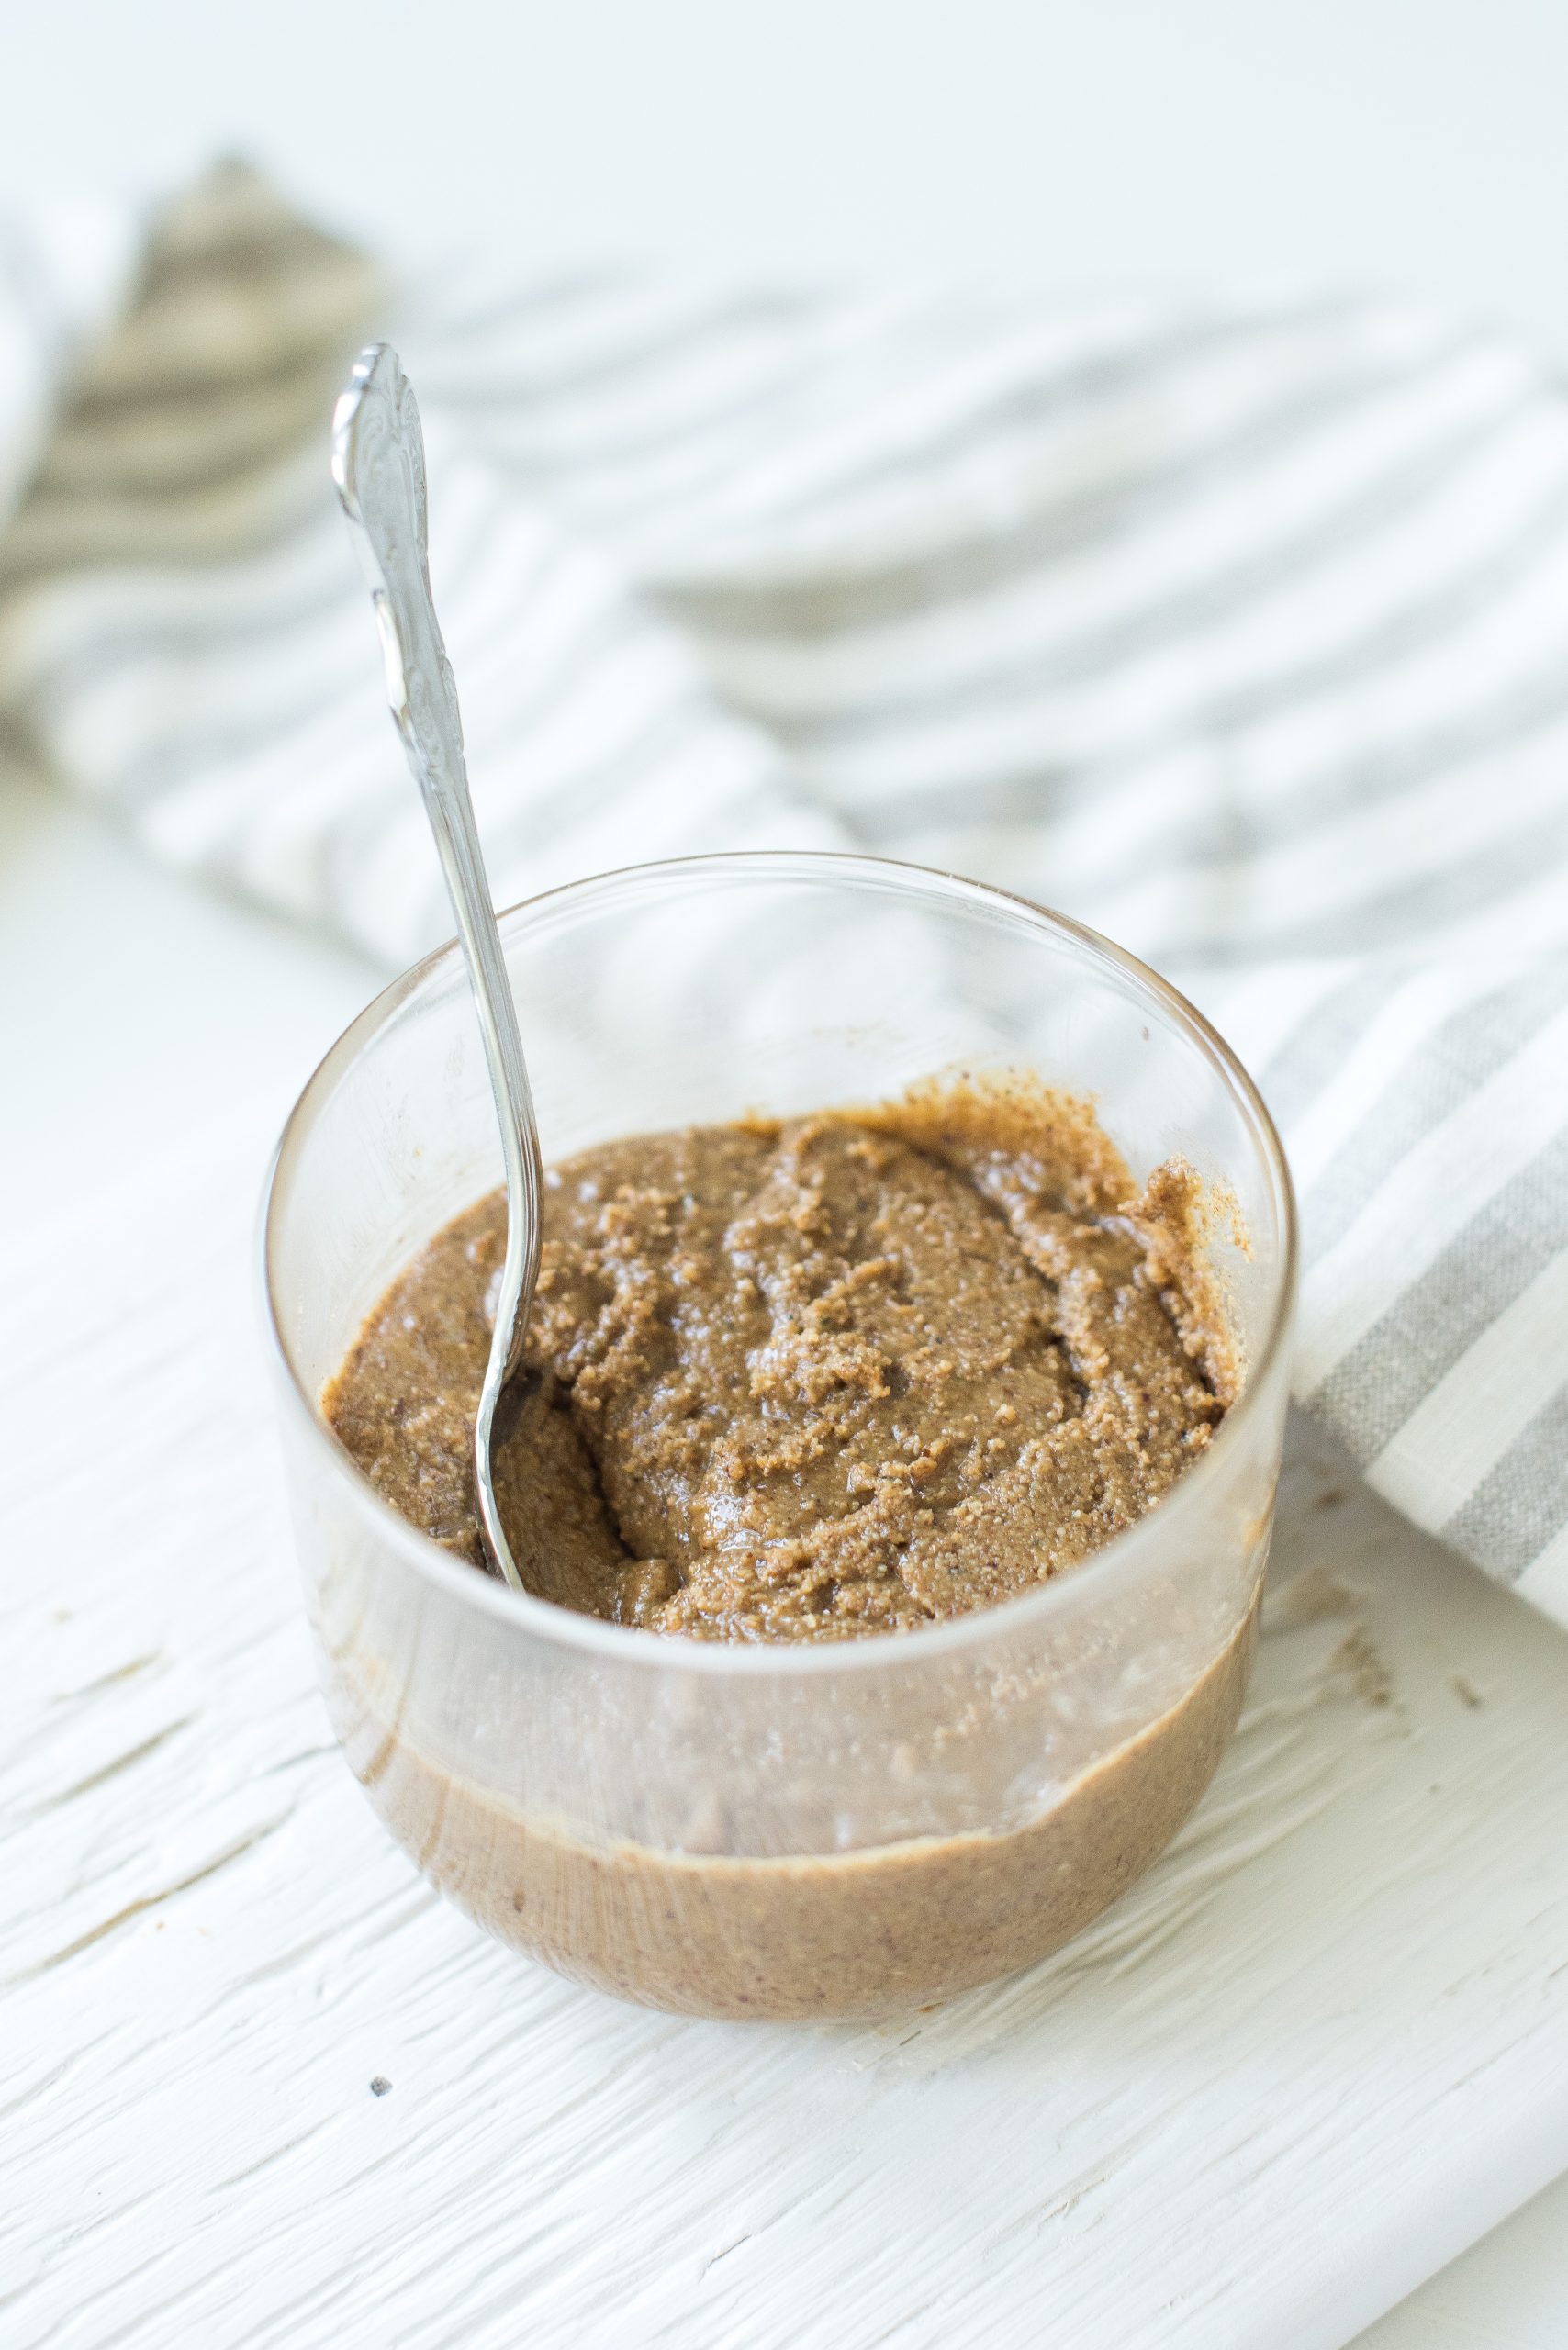 Completed Roasted Nut Butter